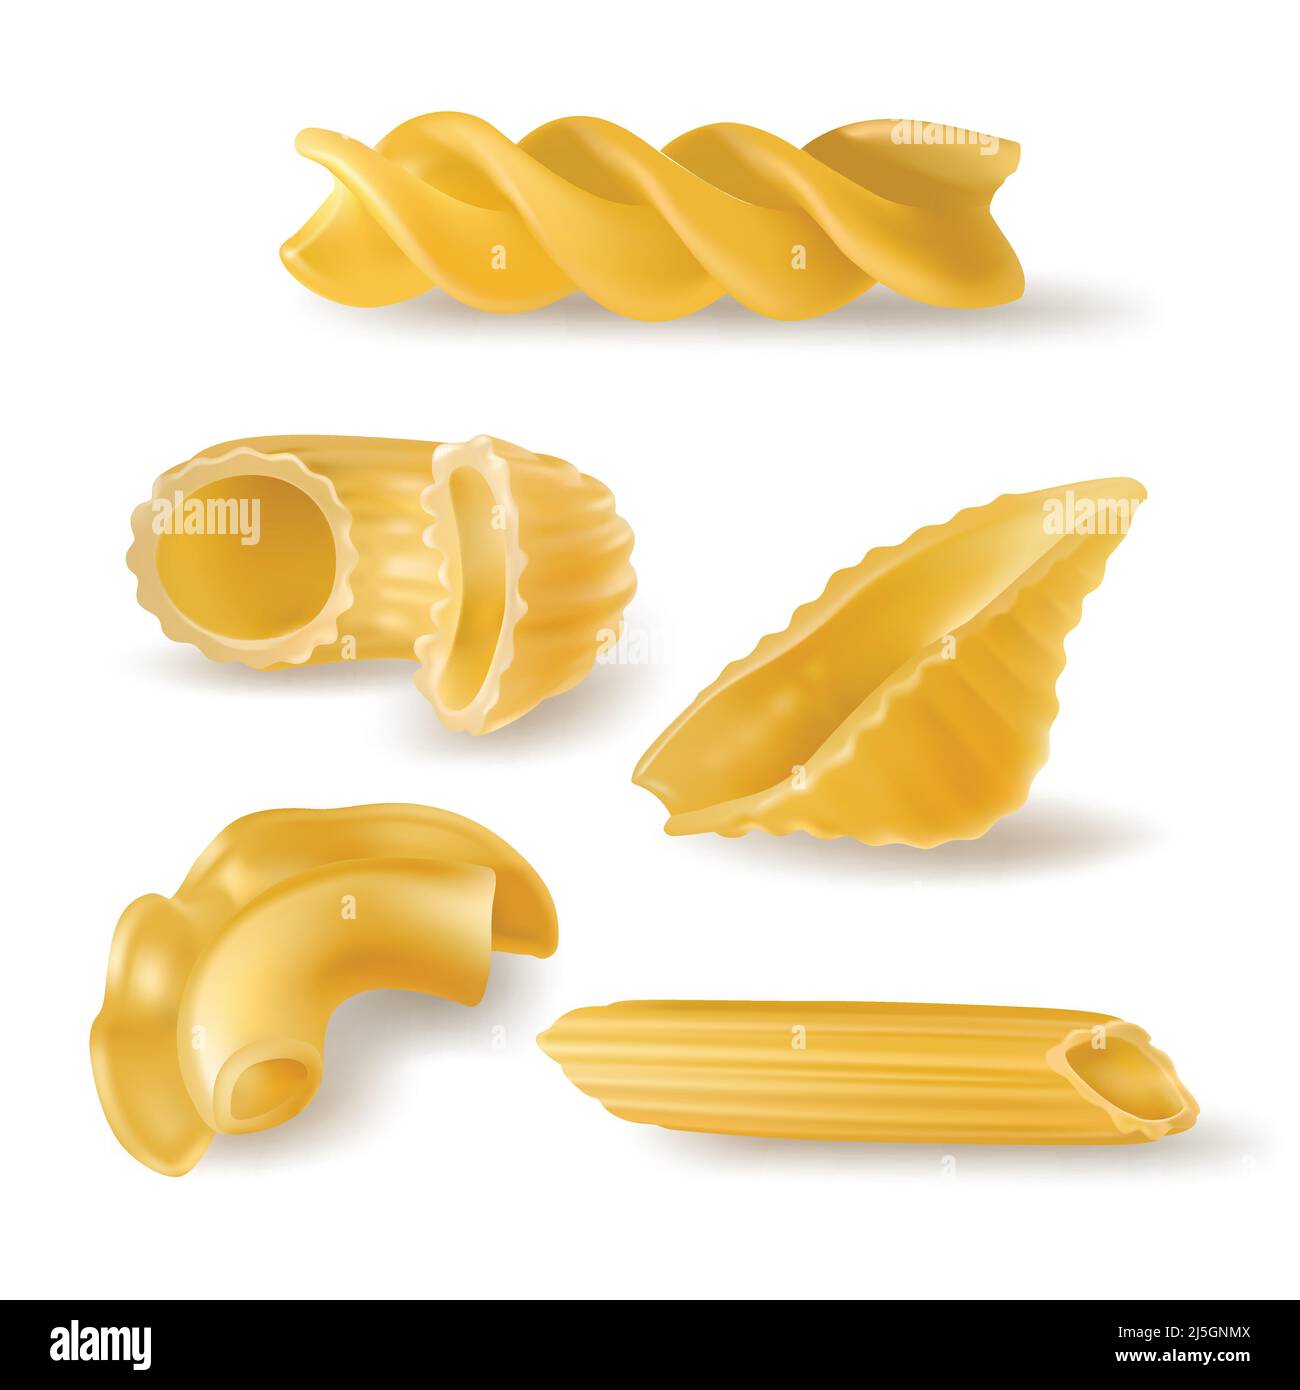 Pasta types Stock Vector Images - Alamy